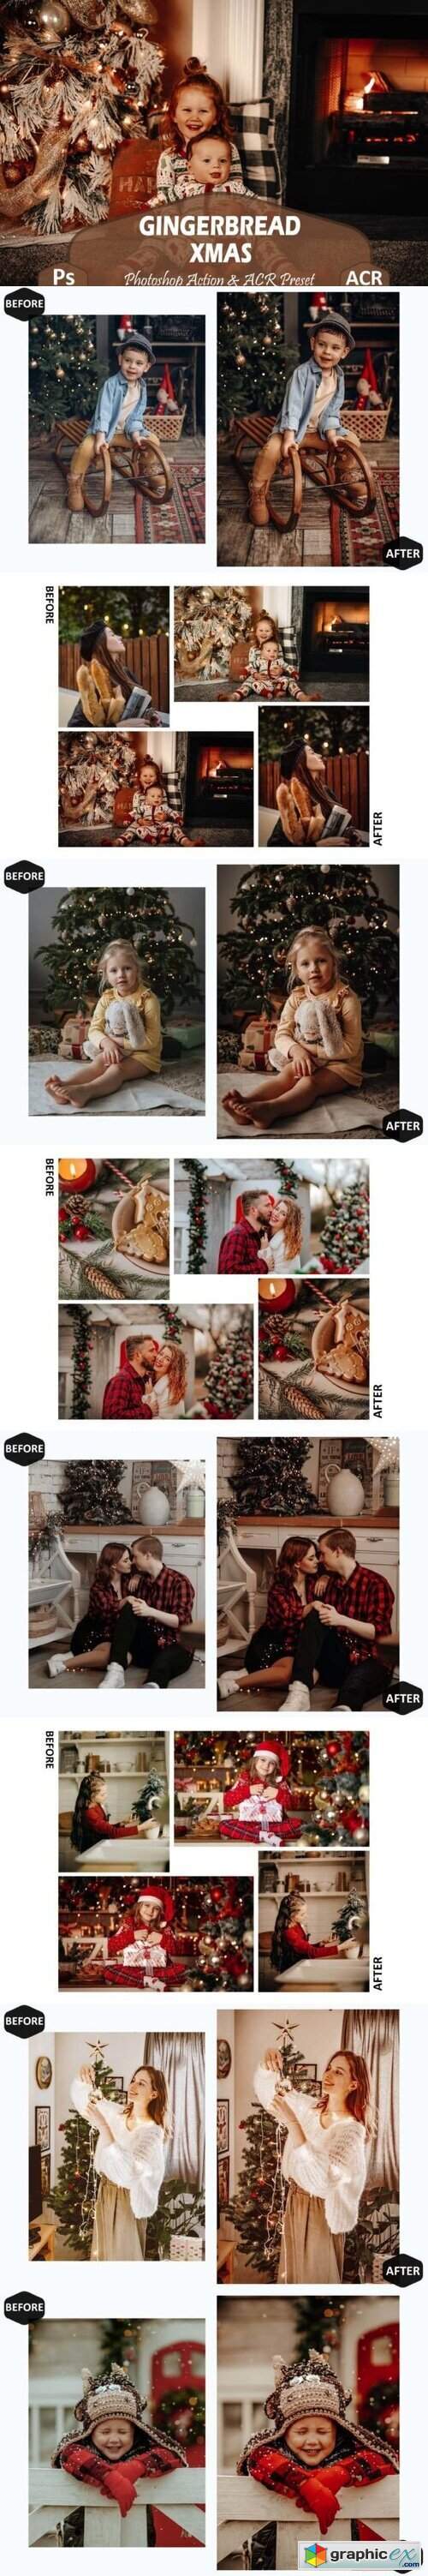 10 Gingerbread Xmas Photoshop Actions